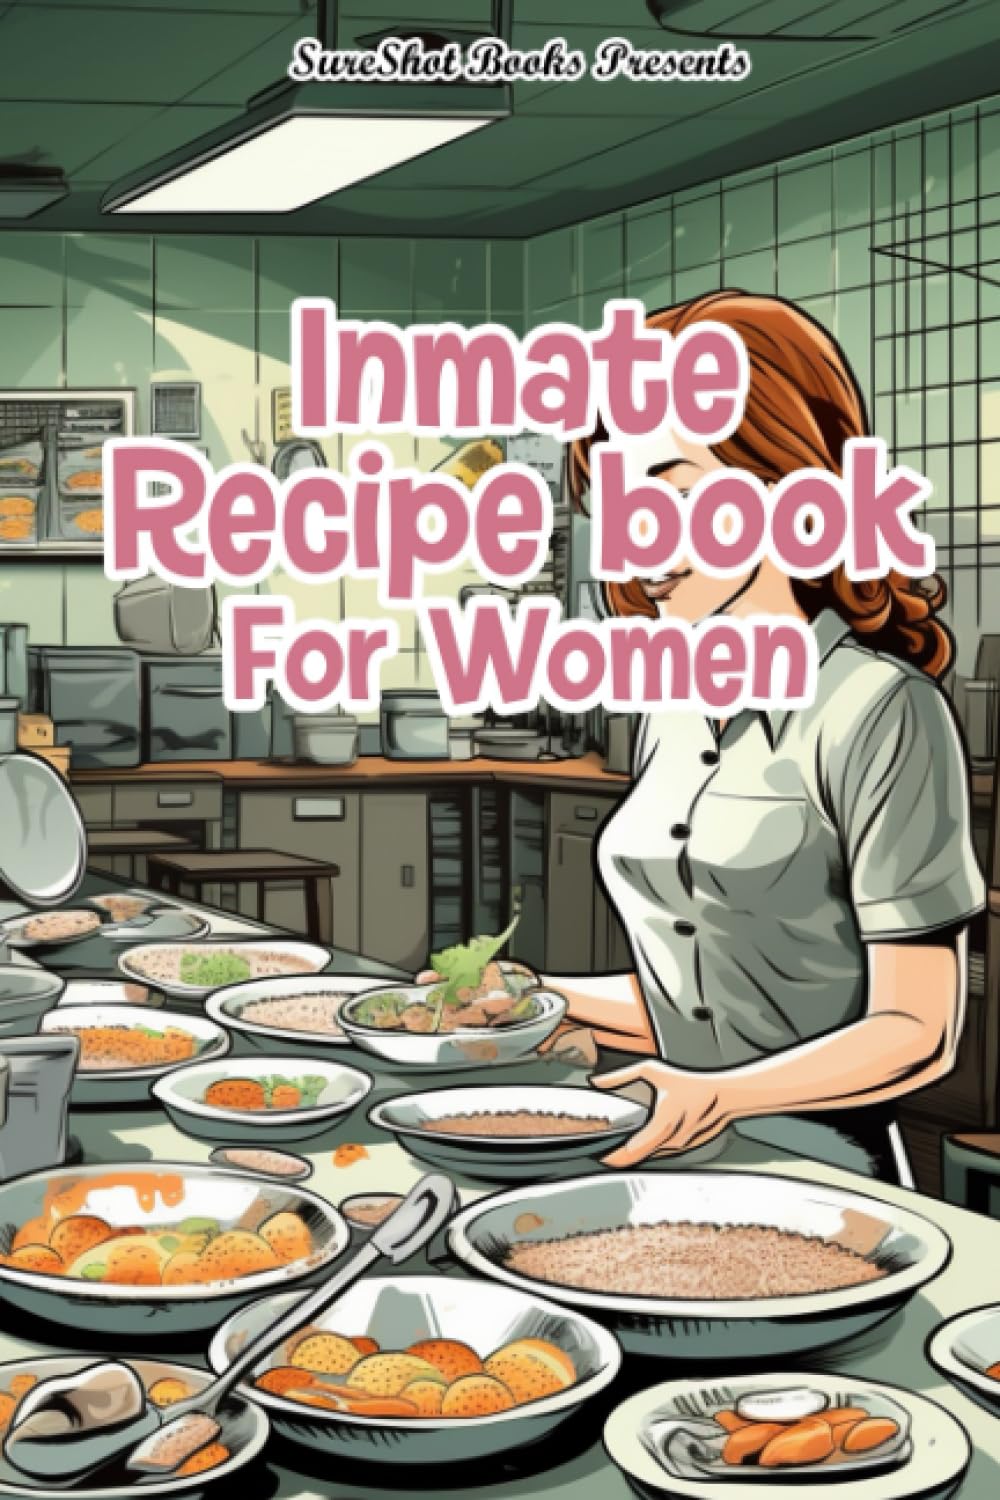 Inmate Recipe Book For Women Fillable Cookbook To Write In Your Own Recipes For Women In Jail, Record Your Favorite Family Dishes, Kitchen Recipe Notebook - SureShot Books Publishing LLC